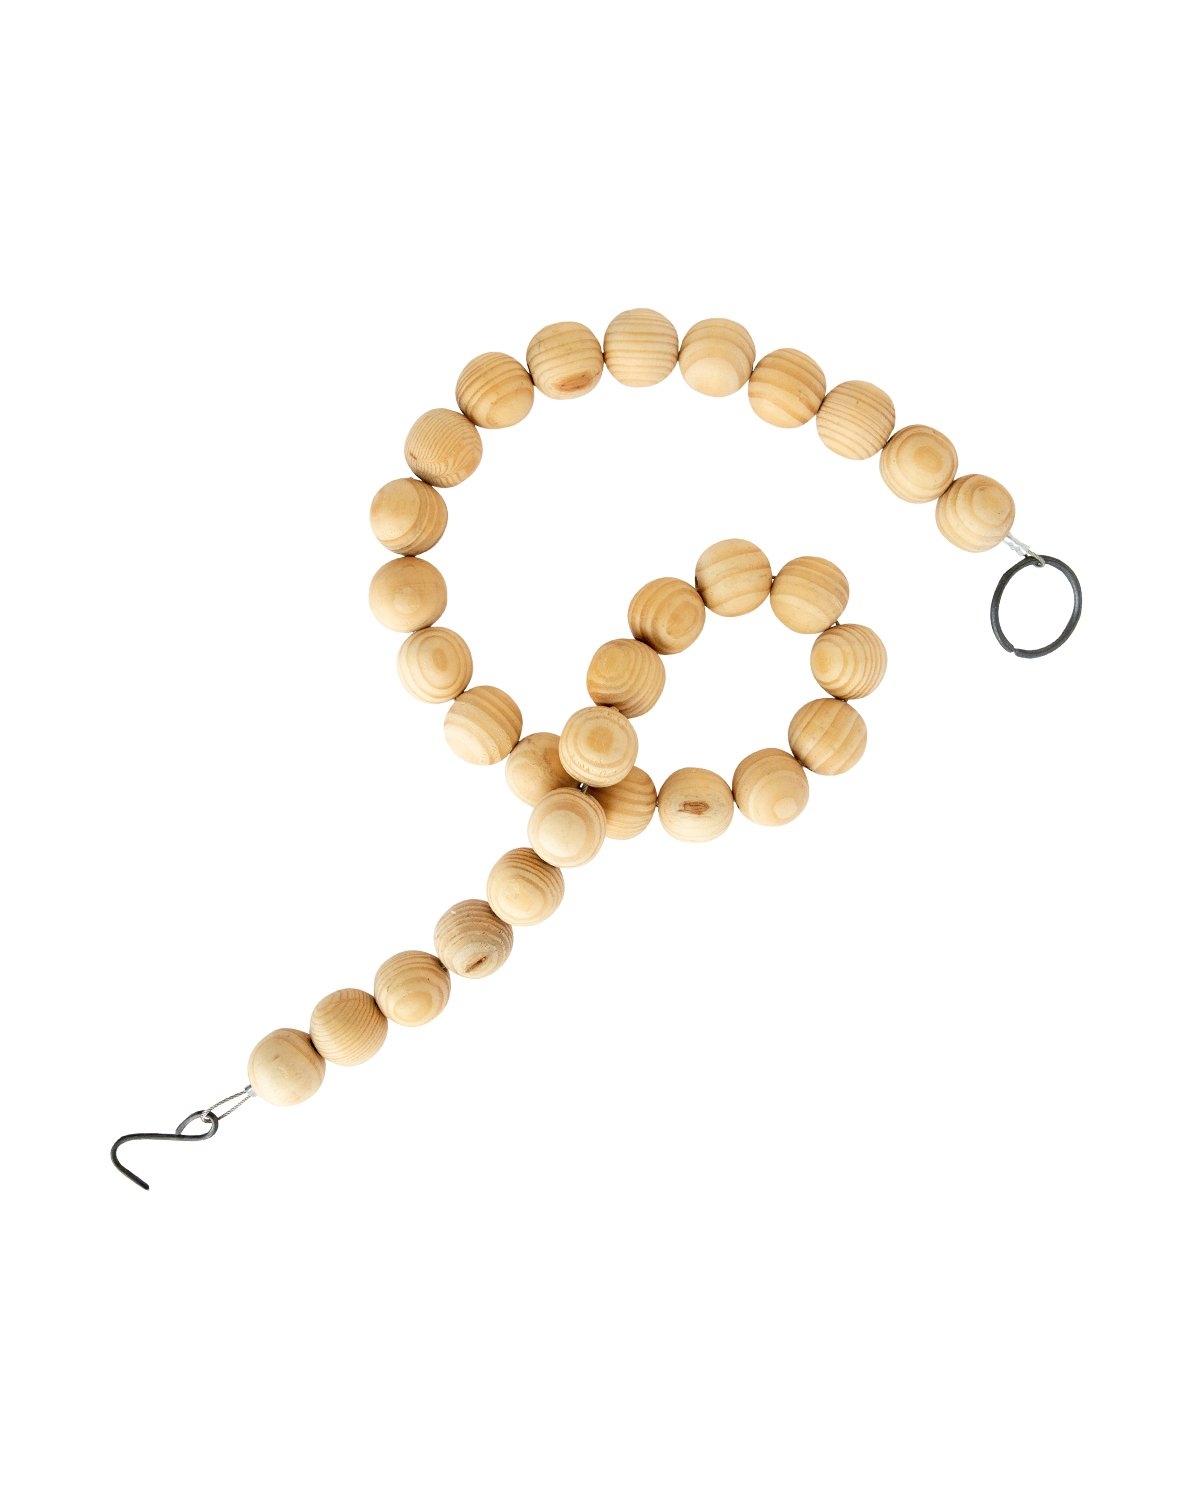 Wooden Beads - Image 1